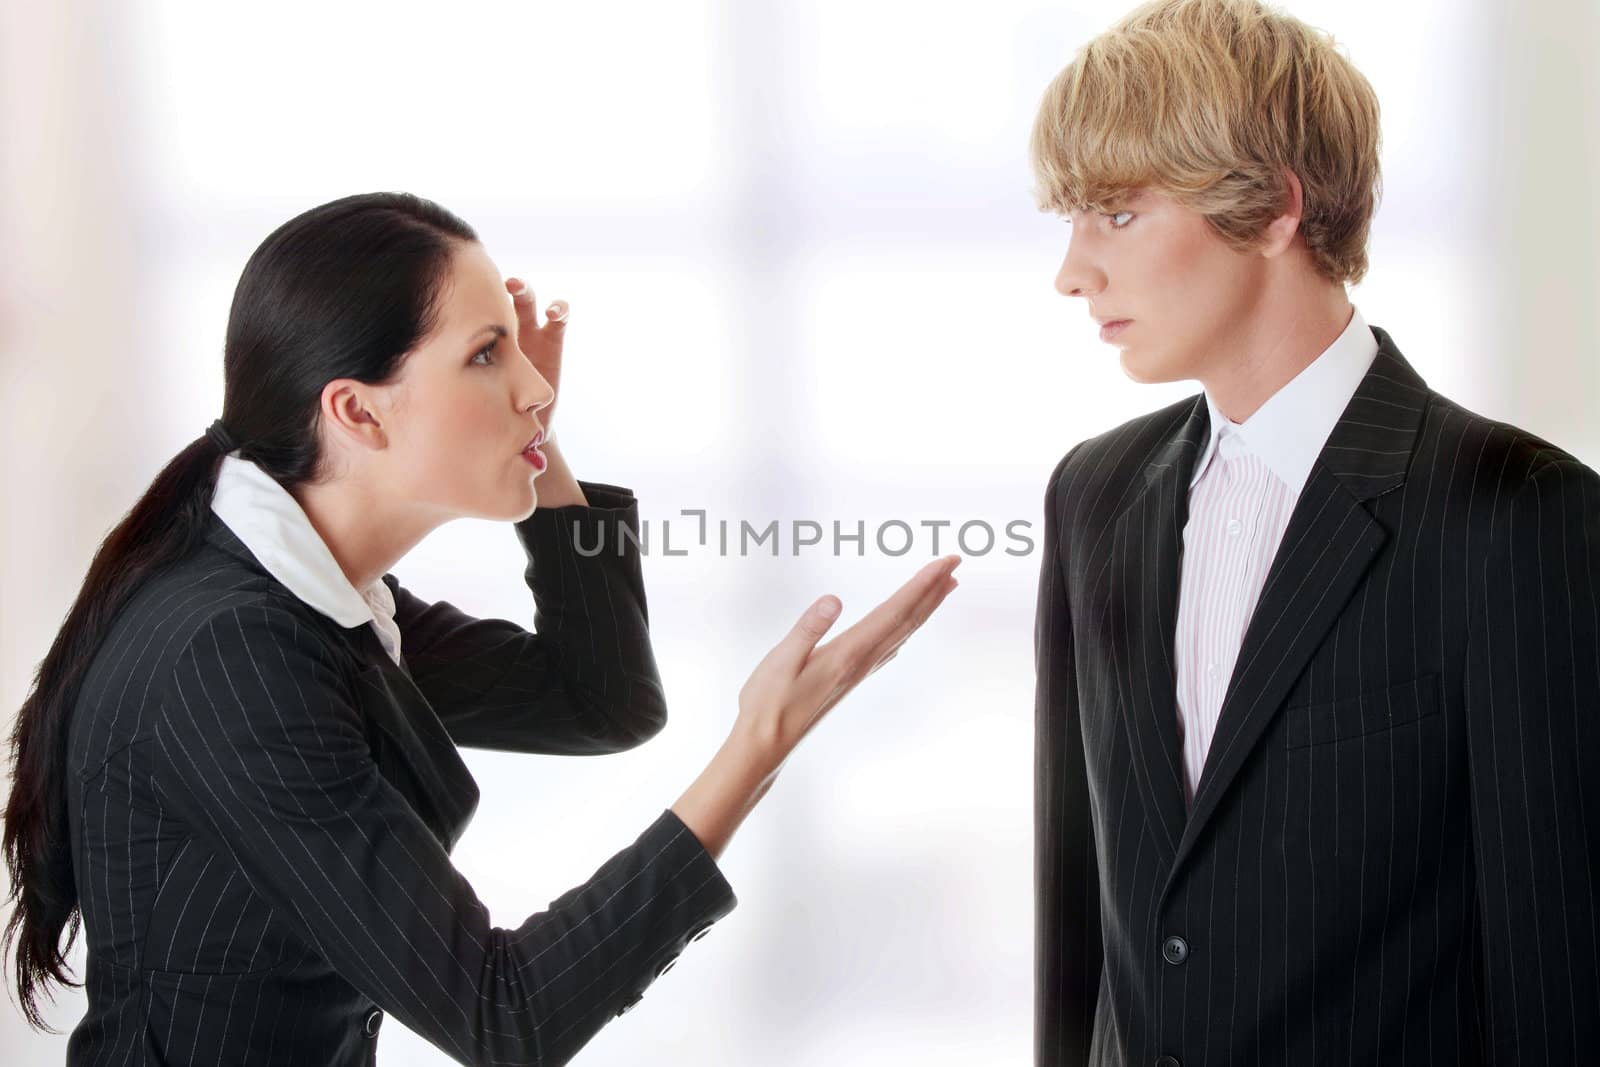 Work Colleagues arguing (woman shouting on man)